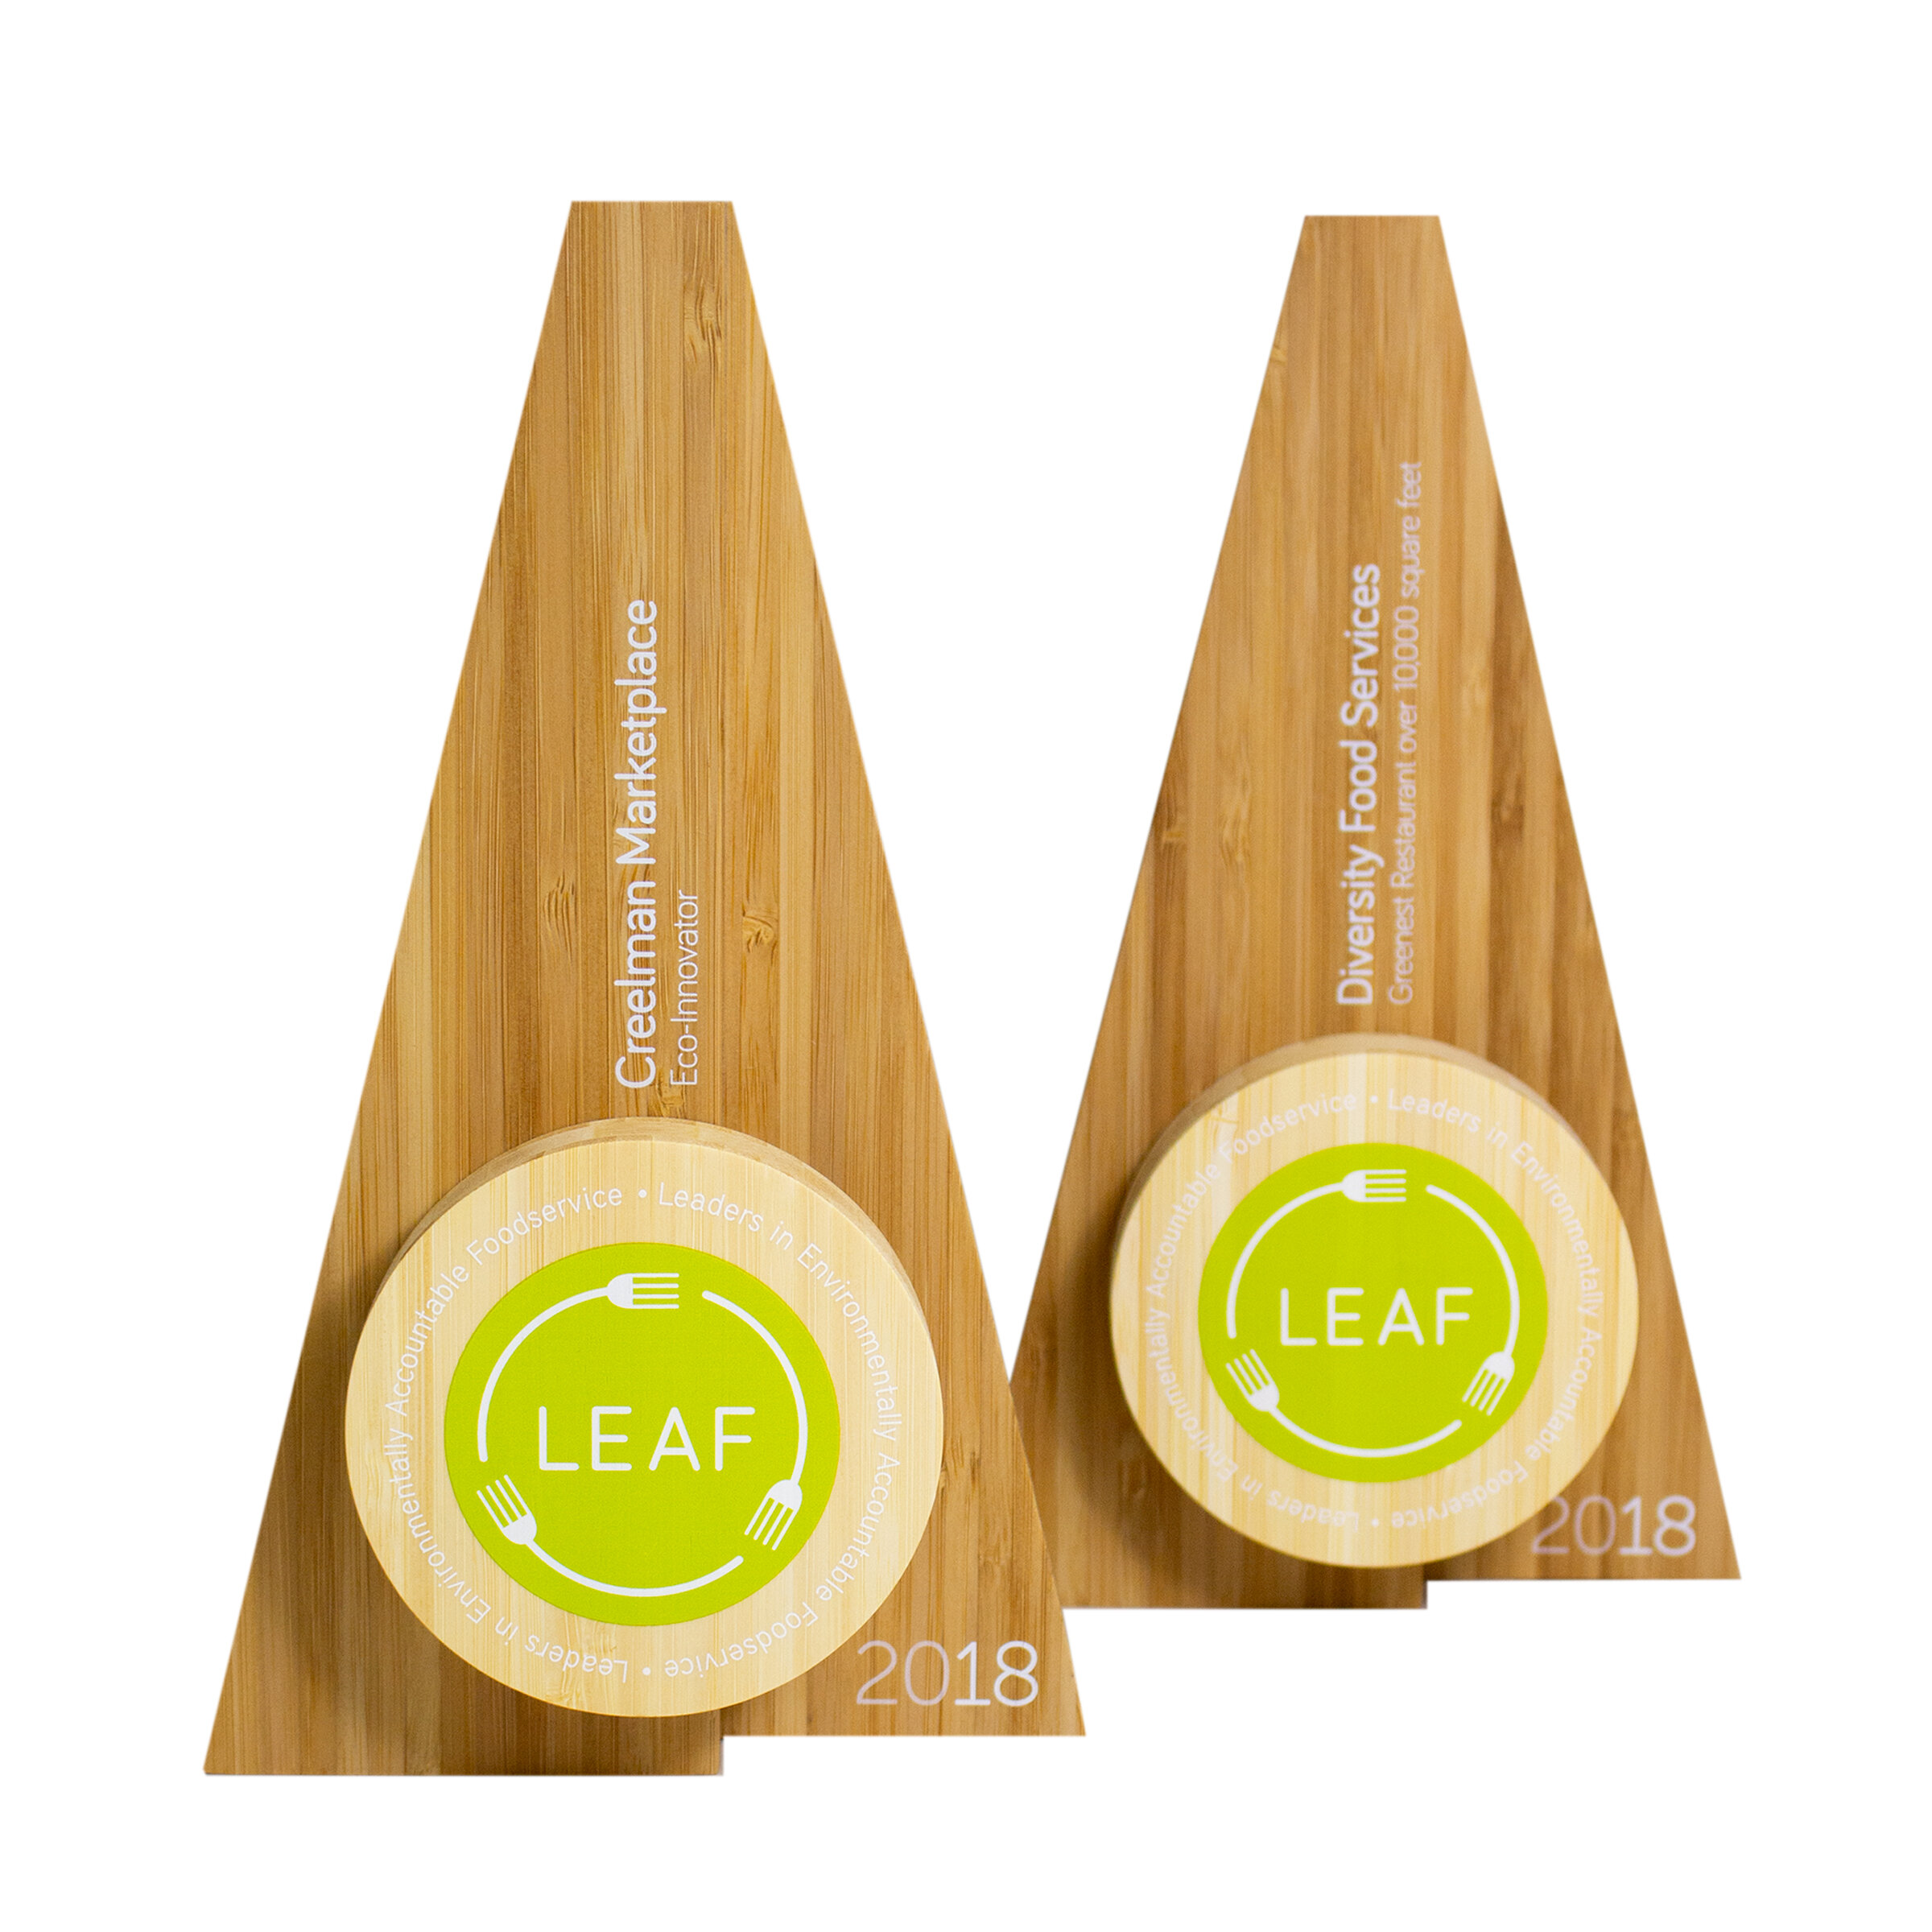 LEAF - Leaders in Environmentally Accountable Foodservice, Canada